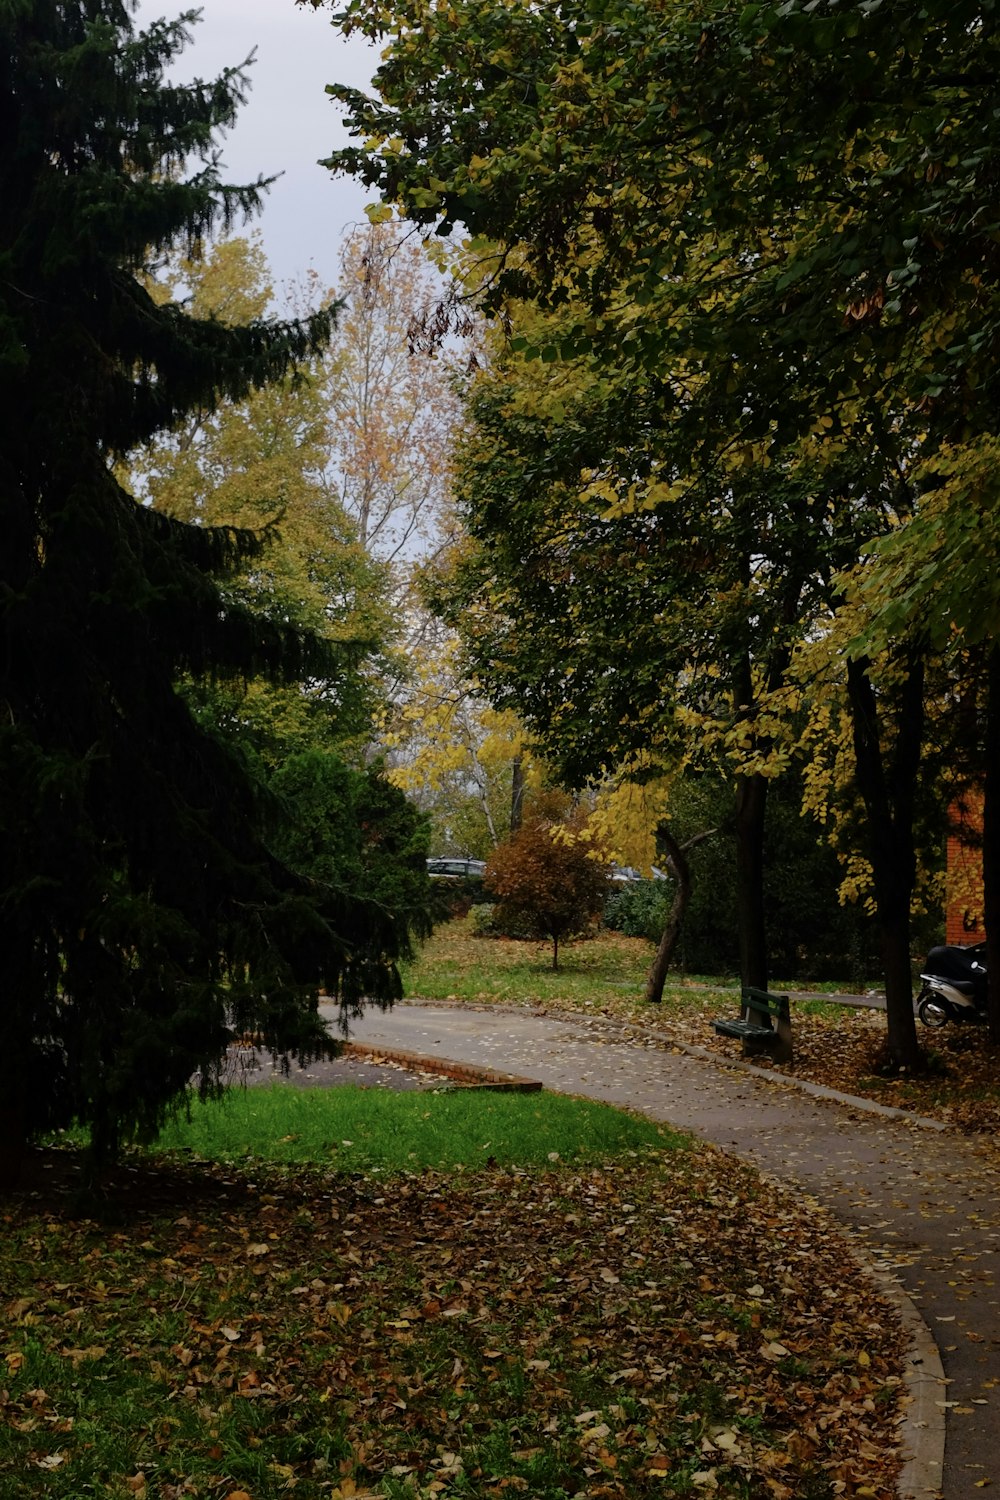 a path in a park with trees and leaves on the ground